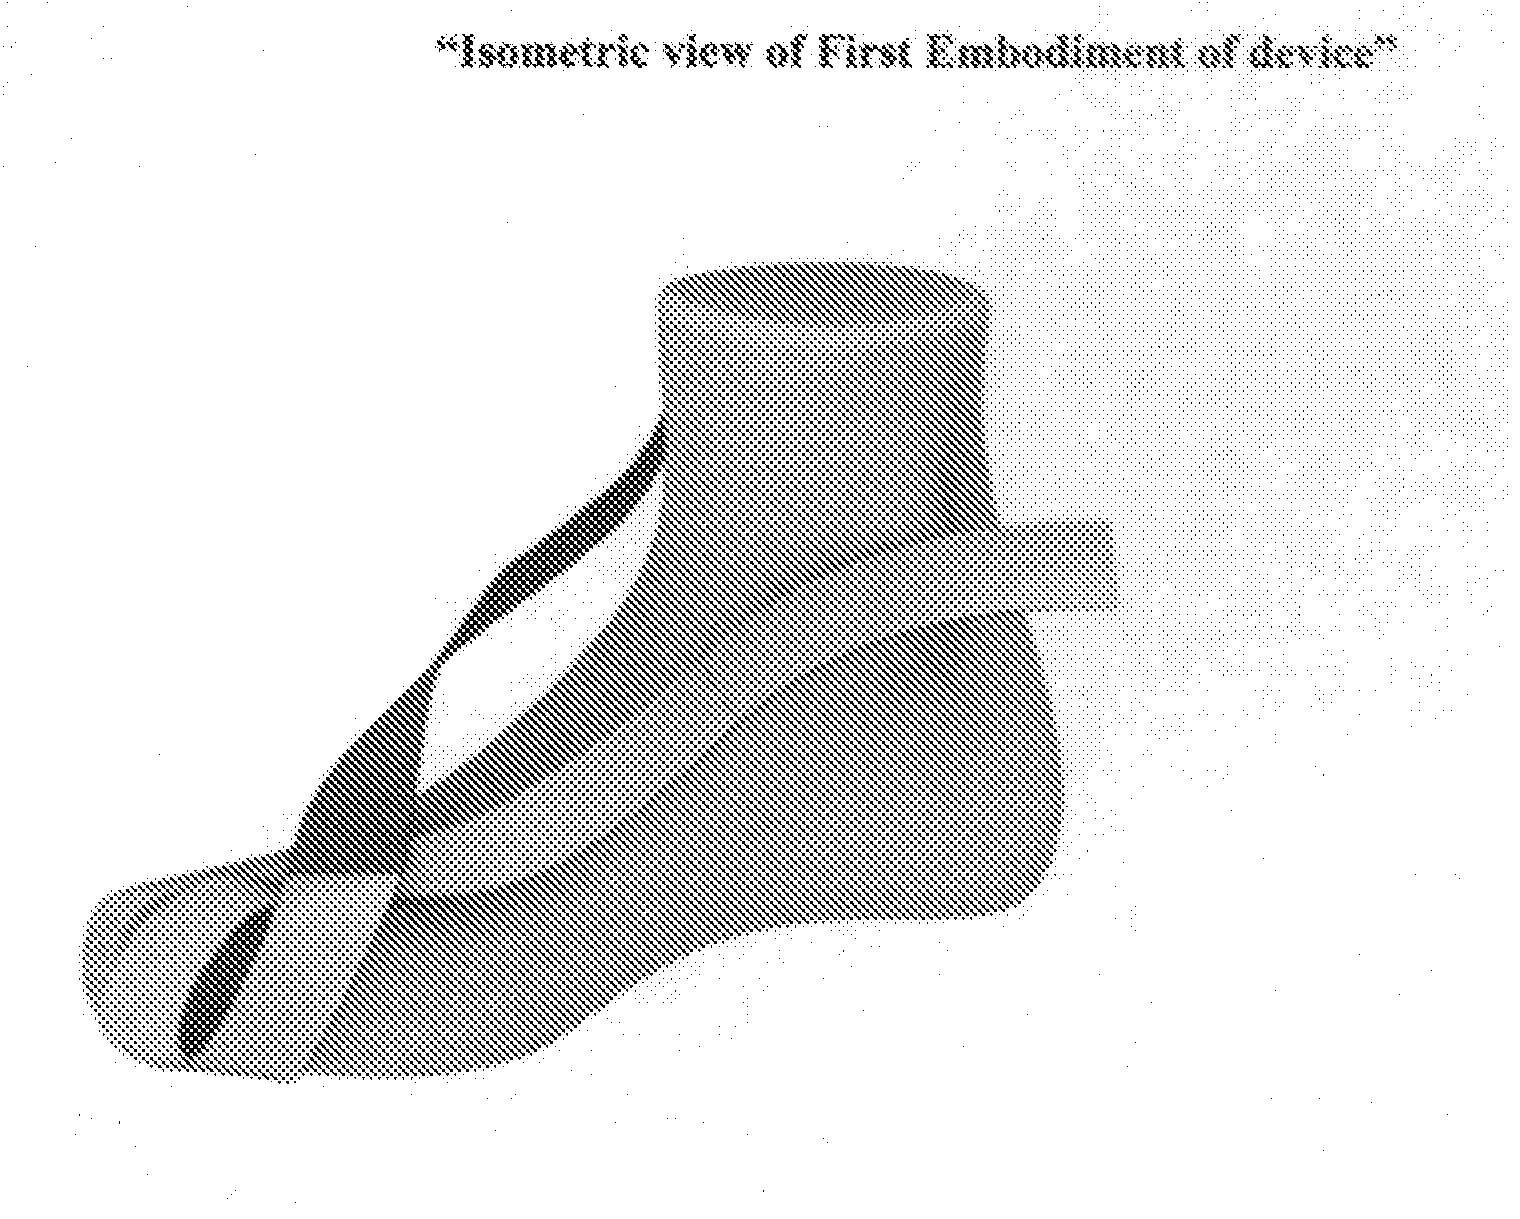 Dynamic Hallux Tension Device For Treatment of Plantar Faciitis